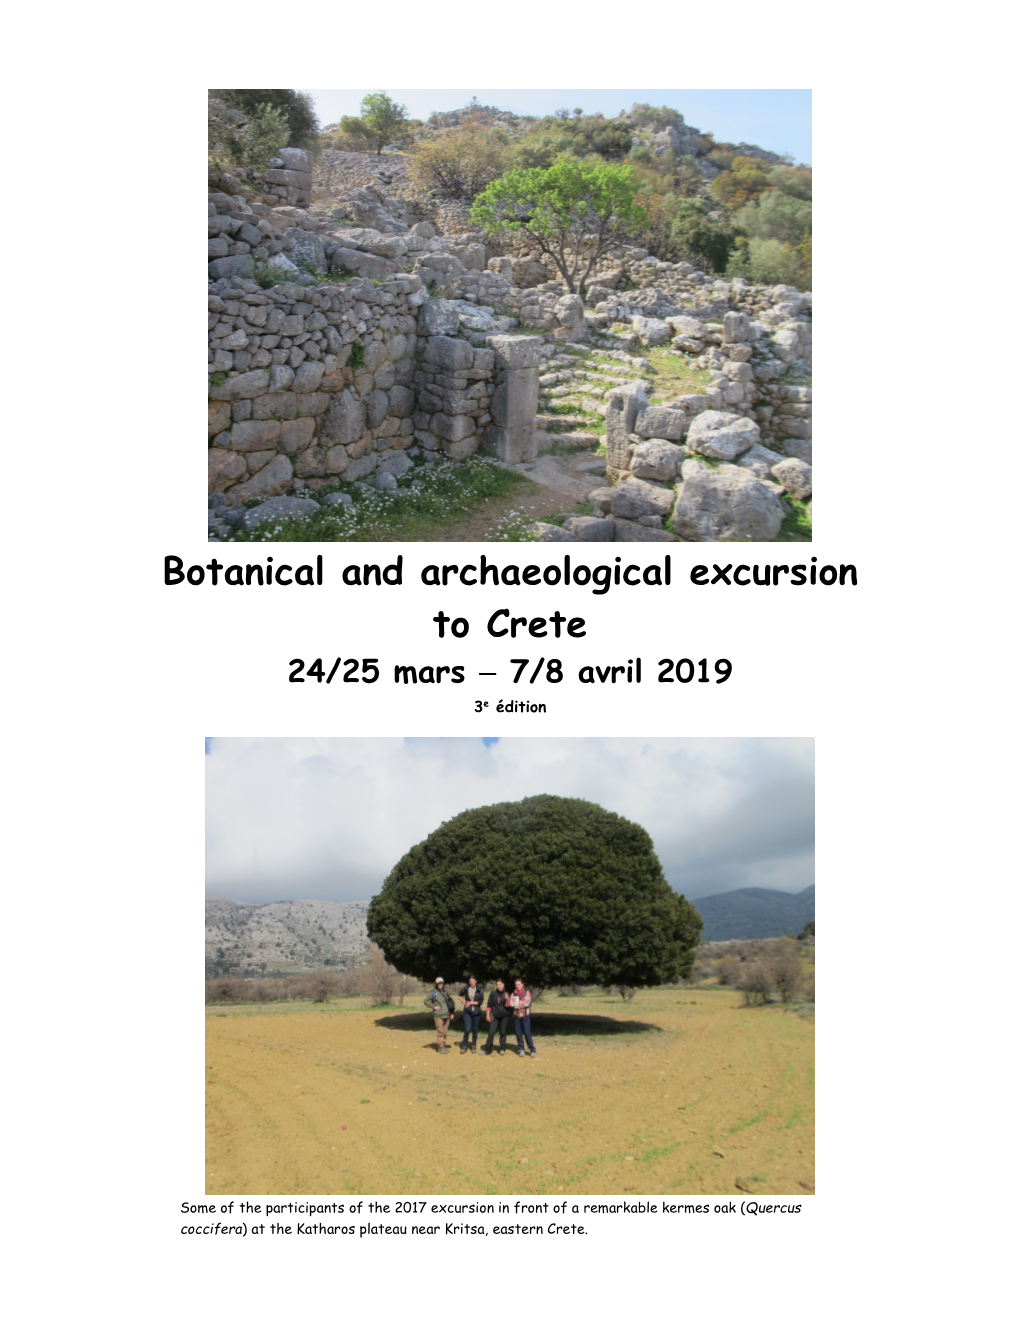 Botanical and Archaeological Excursion to Crete 24/25 Mars −−− 7/8 Avril 2019 3E Édition